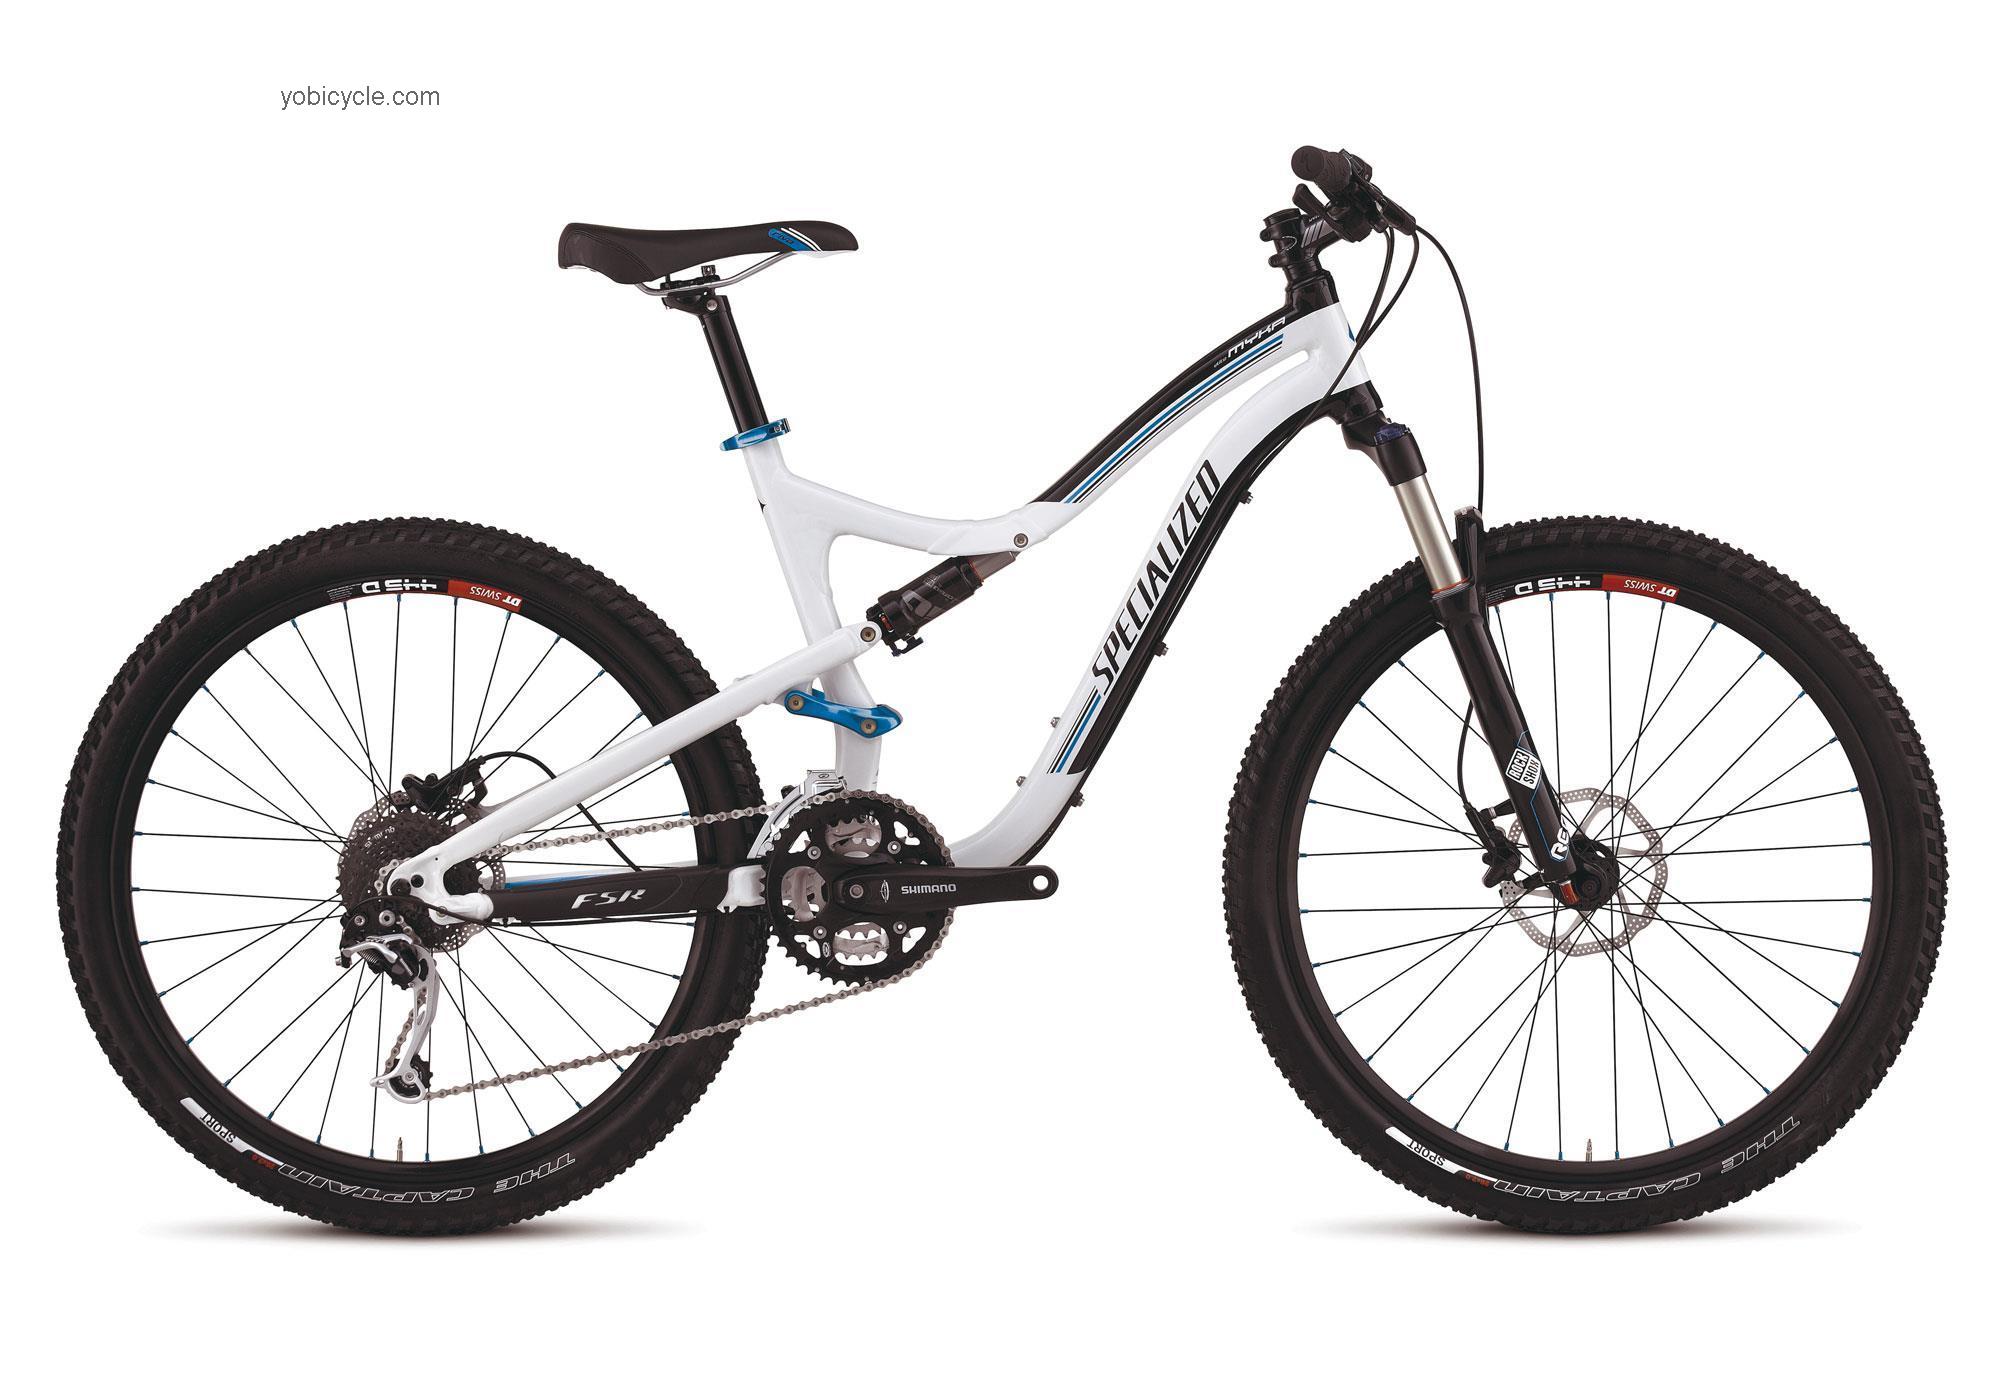 Specialized Myka FSR Elite 2012 comparison online with competitors